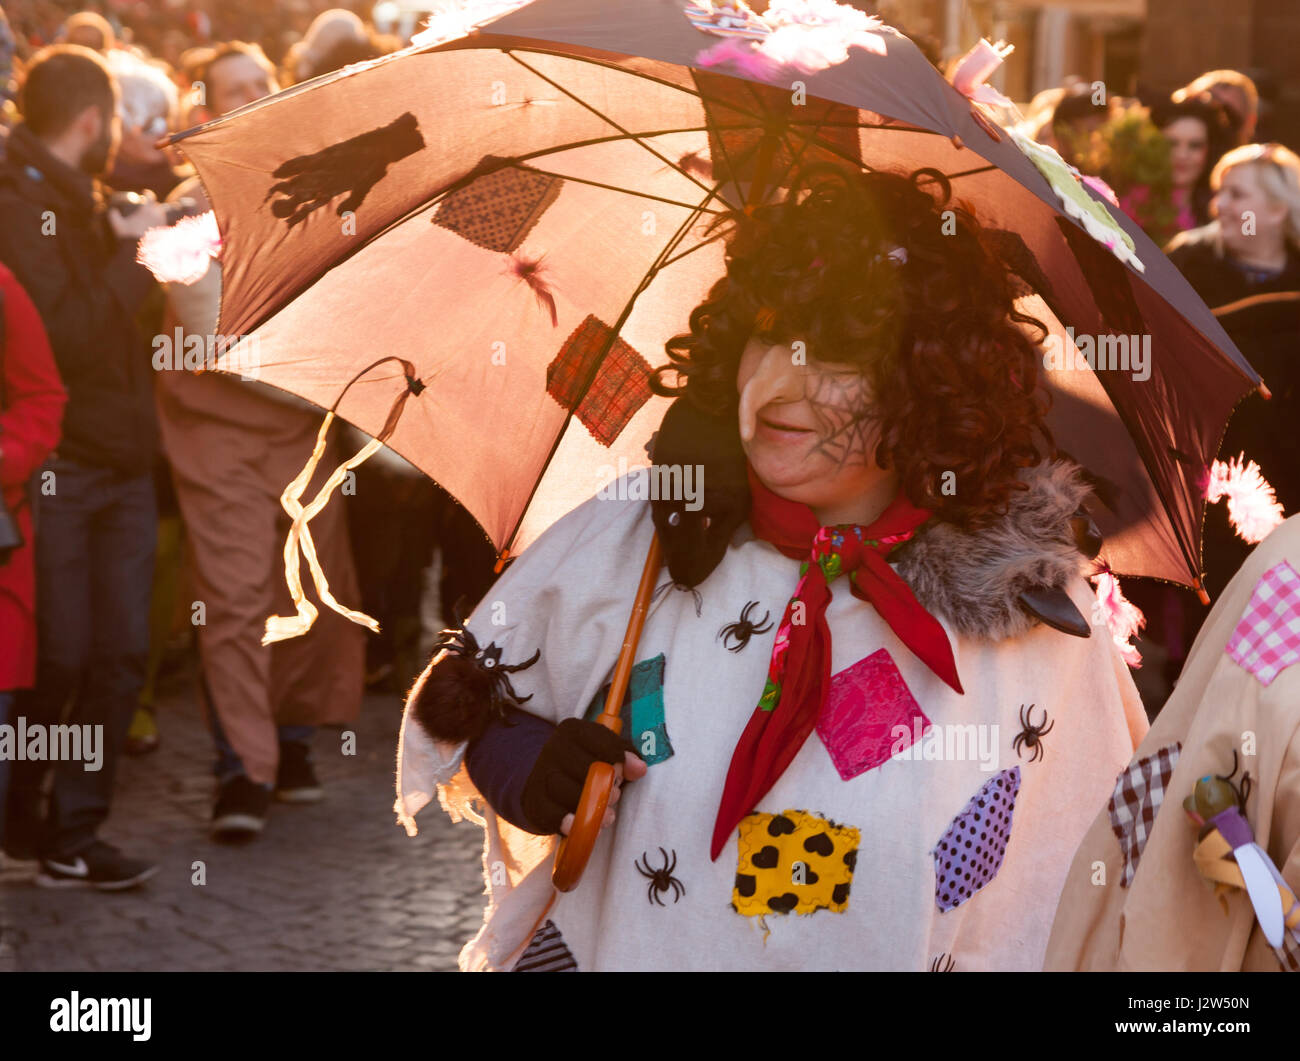 PRAGUE, CZECH REPUBLIC - APRIL 30, 2017: Participants of a costumed parade in the streets of Prague on witch burning night ('carodejnice') Stock Photo